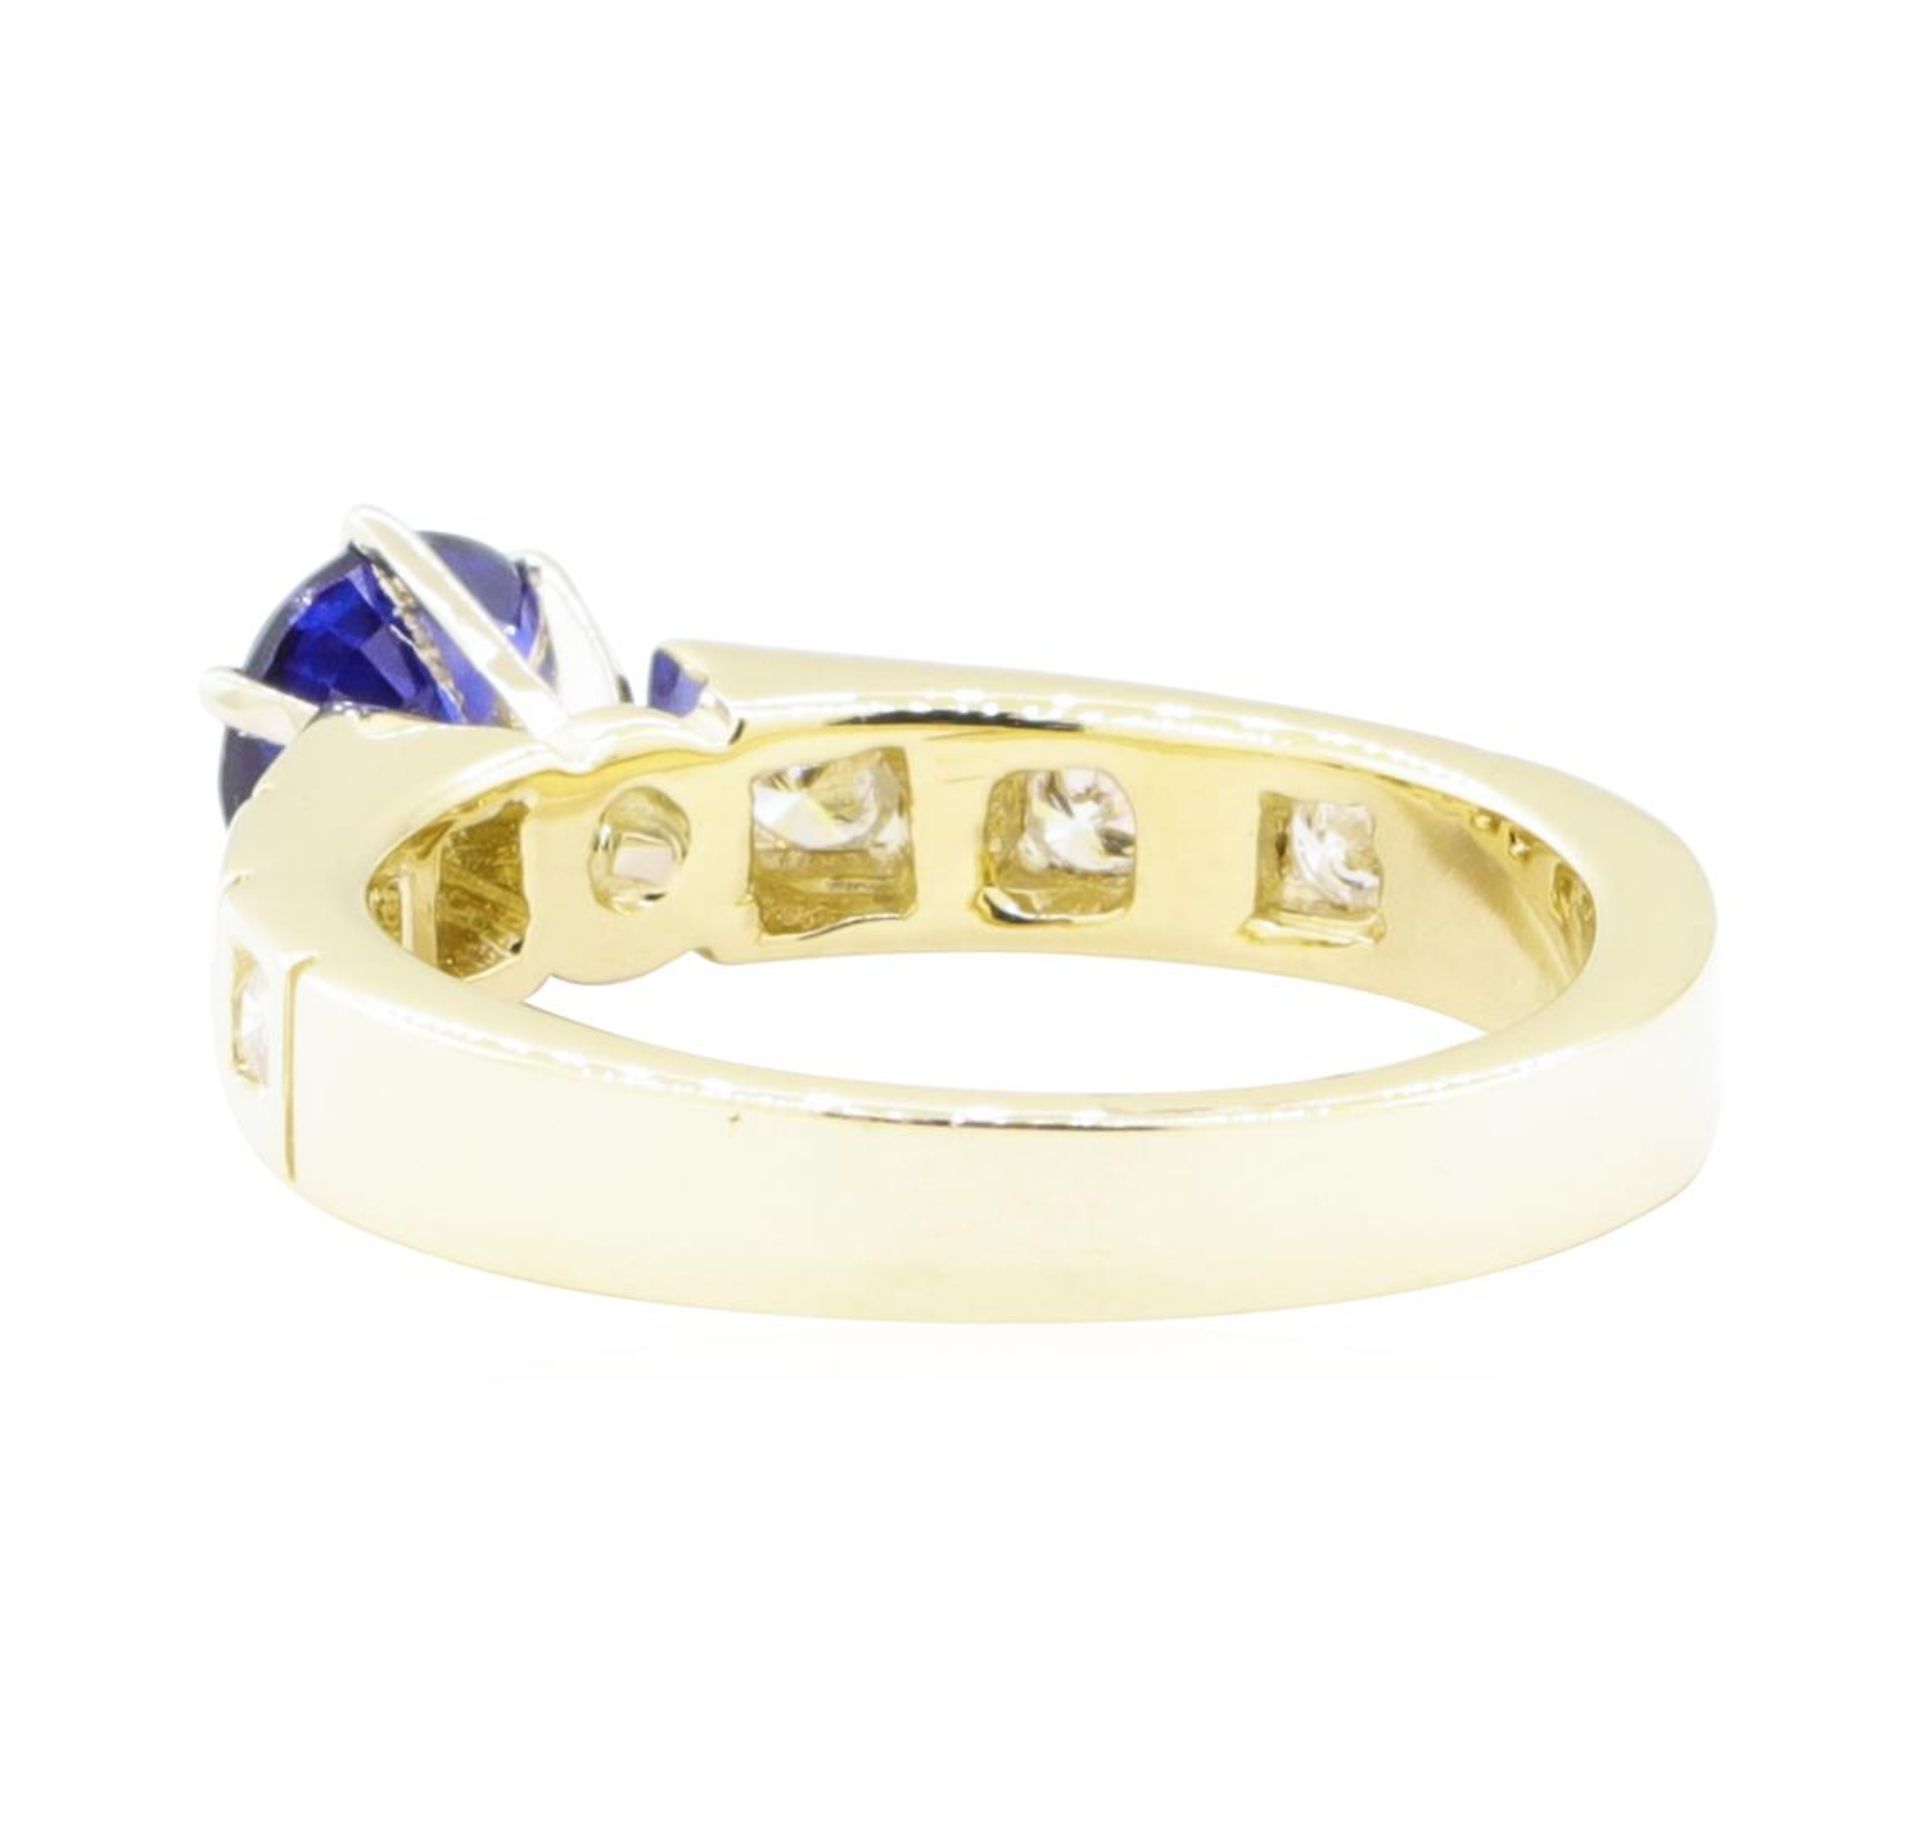 1.34ctw Sapphire and Diamond Ring - 14KT Yellow Gold - Image 3 of 4